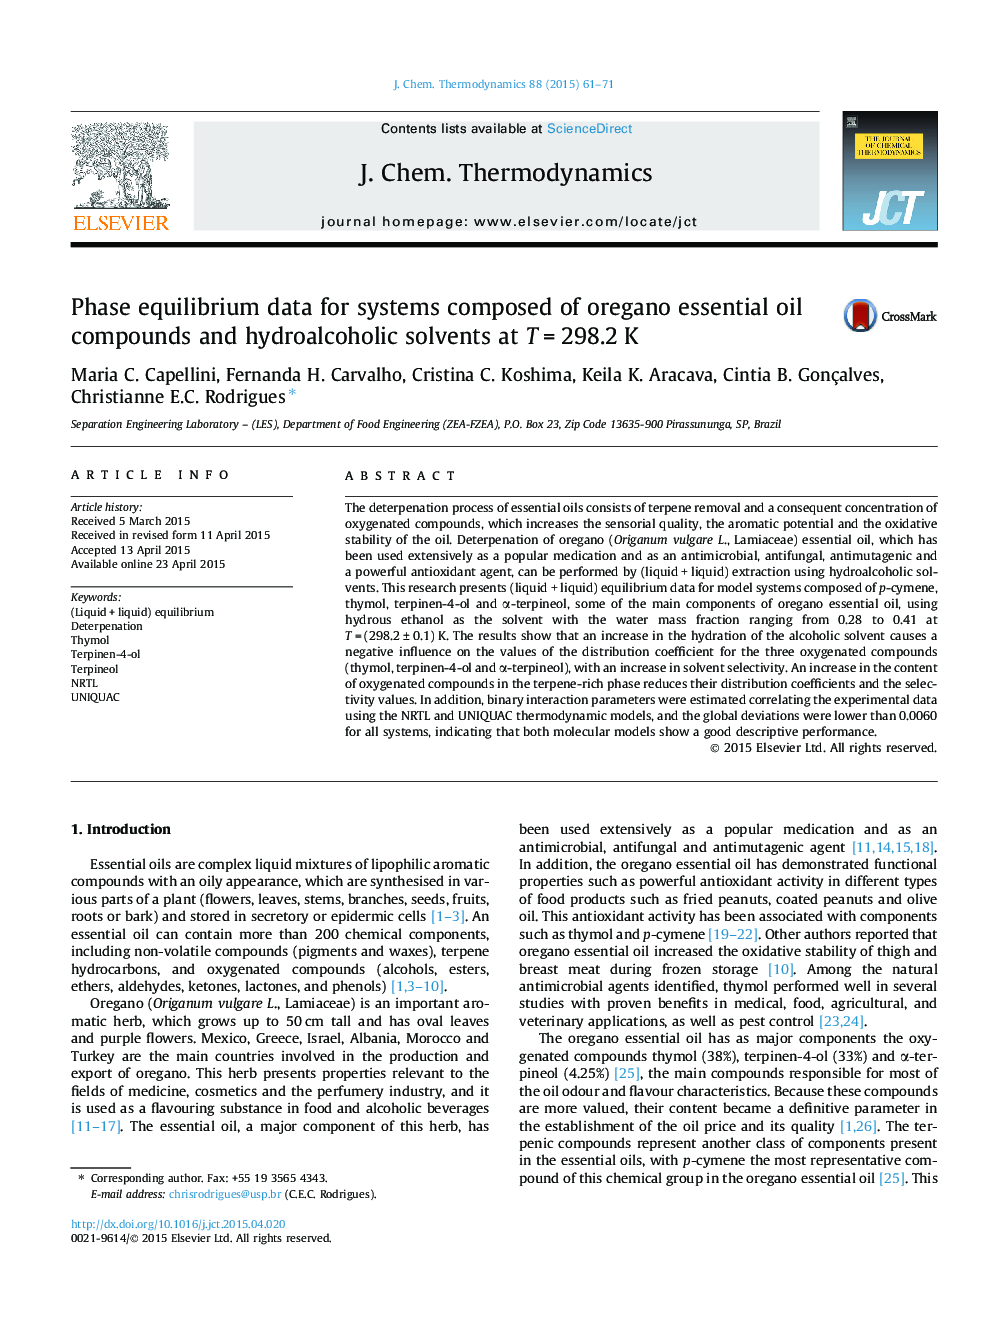 Phase equilibrium data for systems composed of oregano essential oil compounds and hydroalcoholic solvents at T = 298.2 K